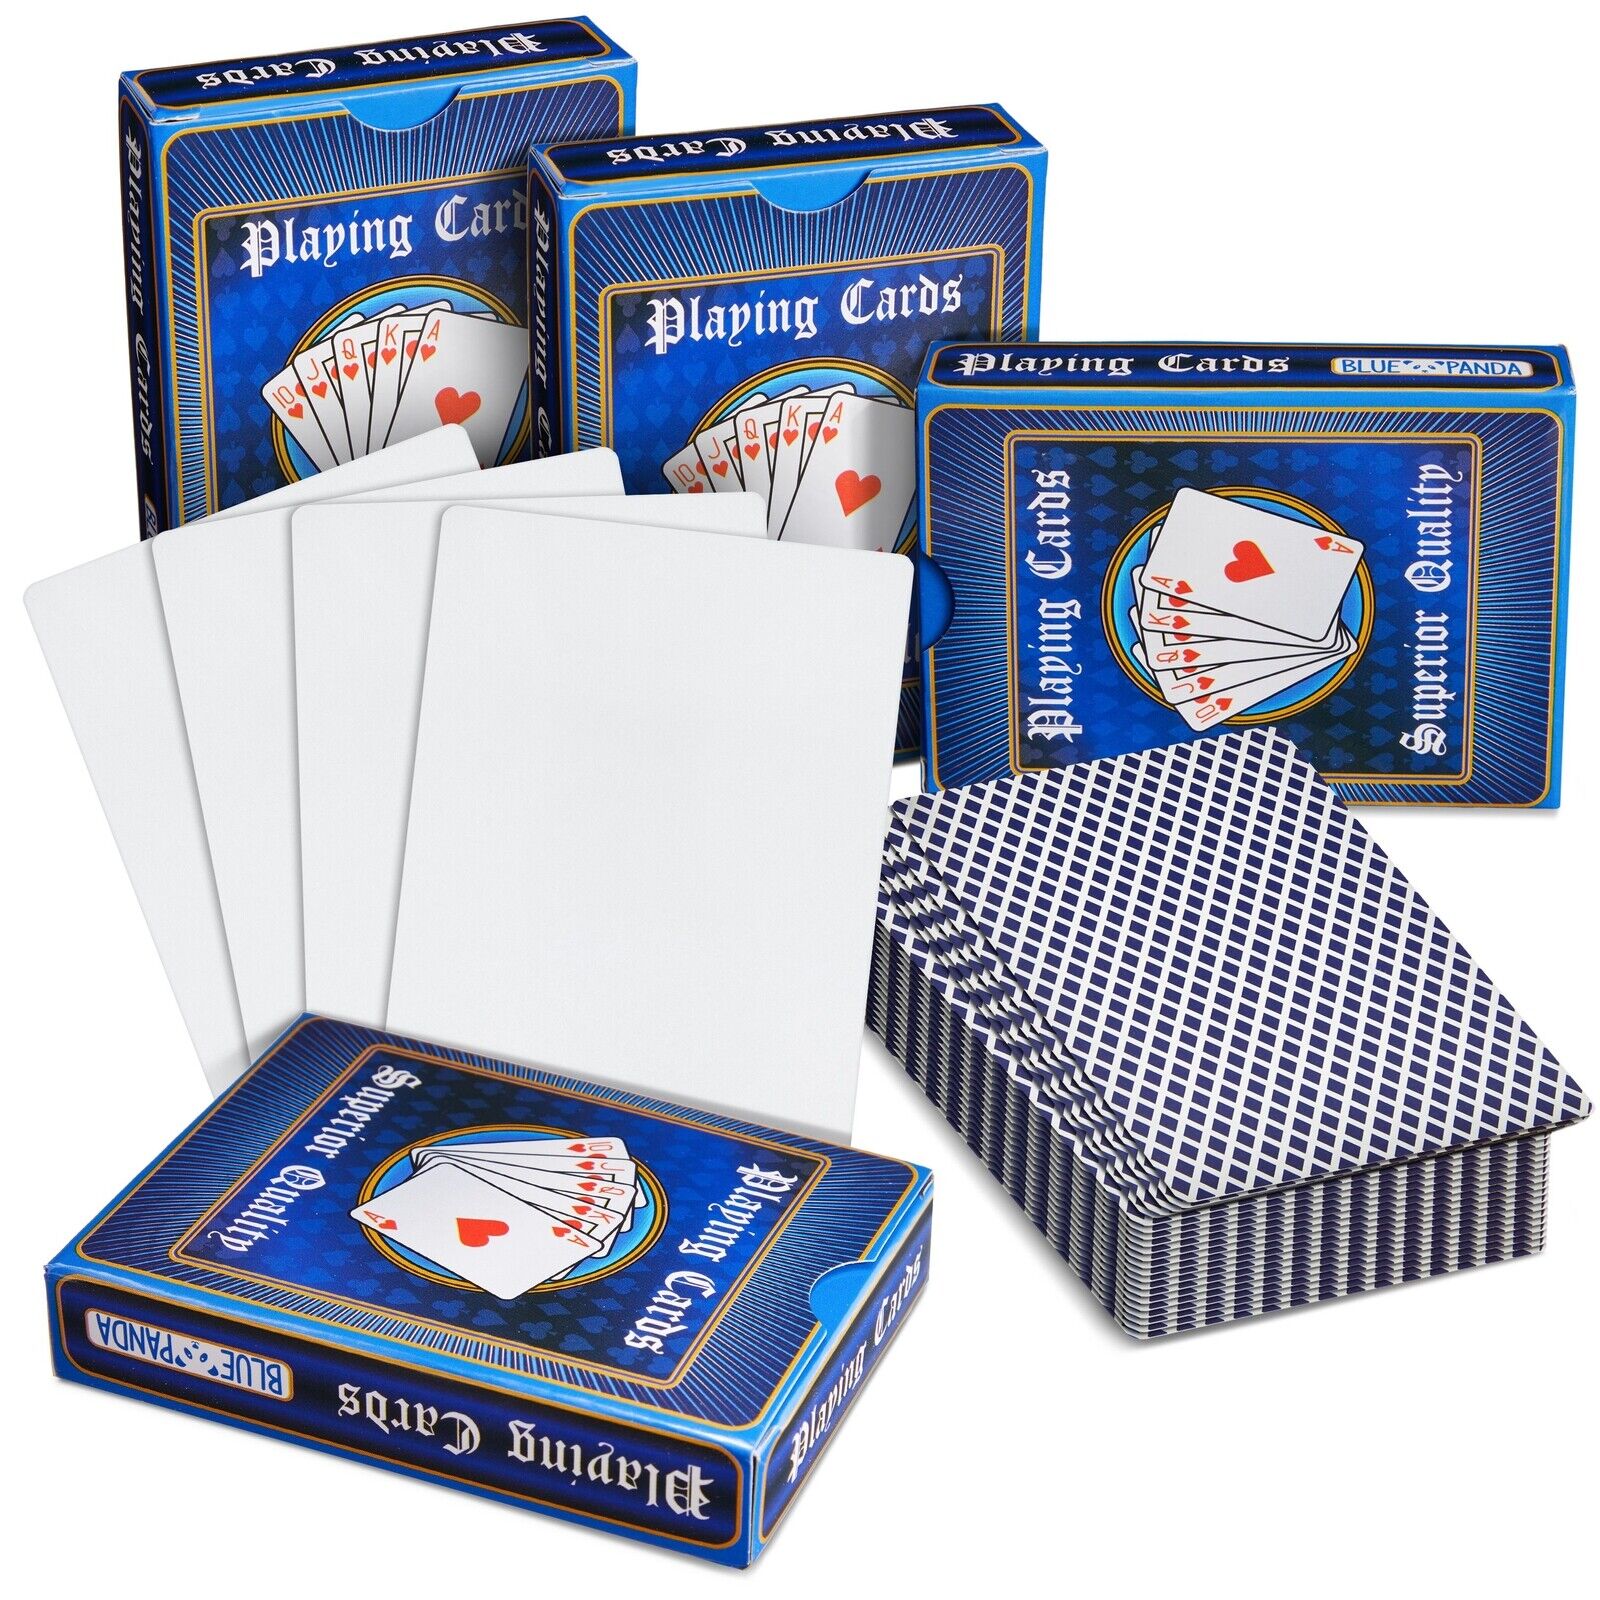 224 Blank Custom Cards for DIY Game Cards, Gift Cards, Diamond Backing, 3 x 4 In